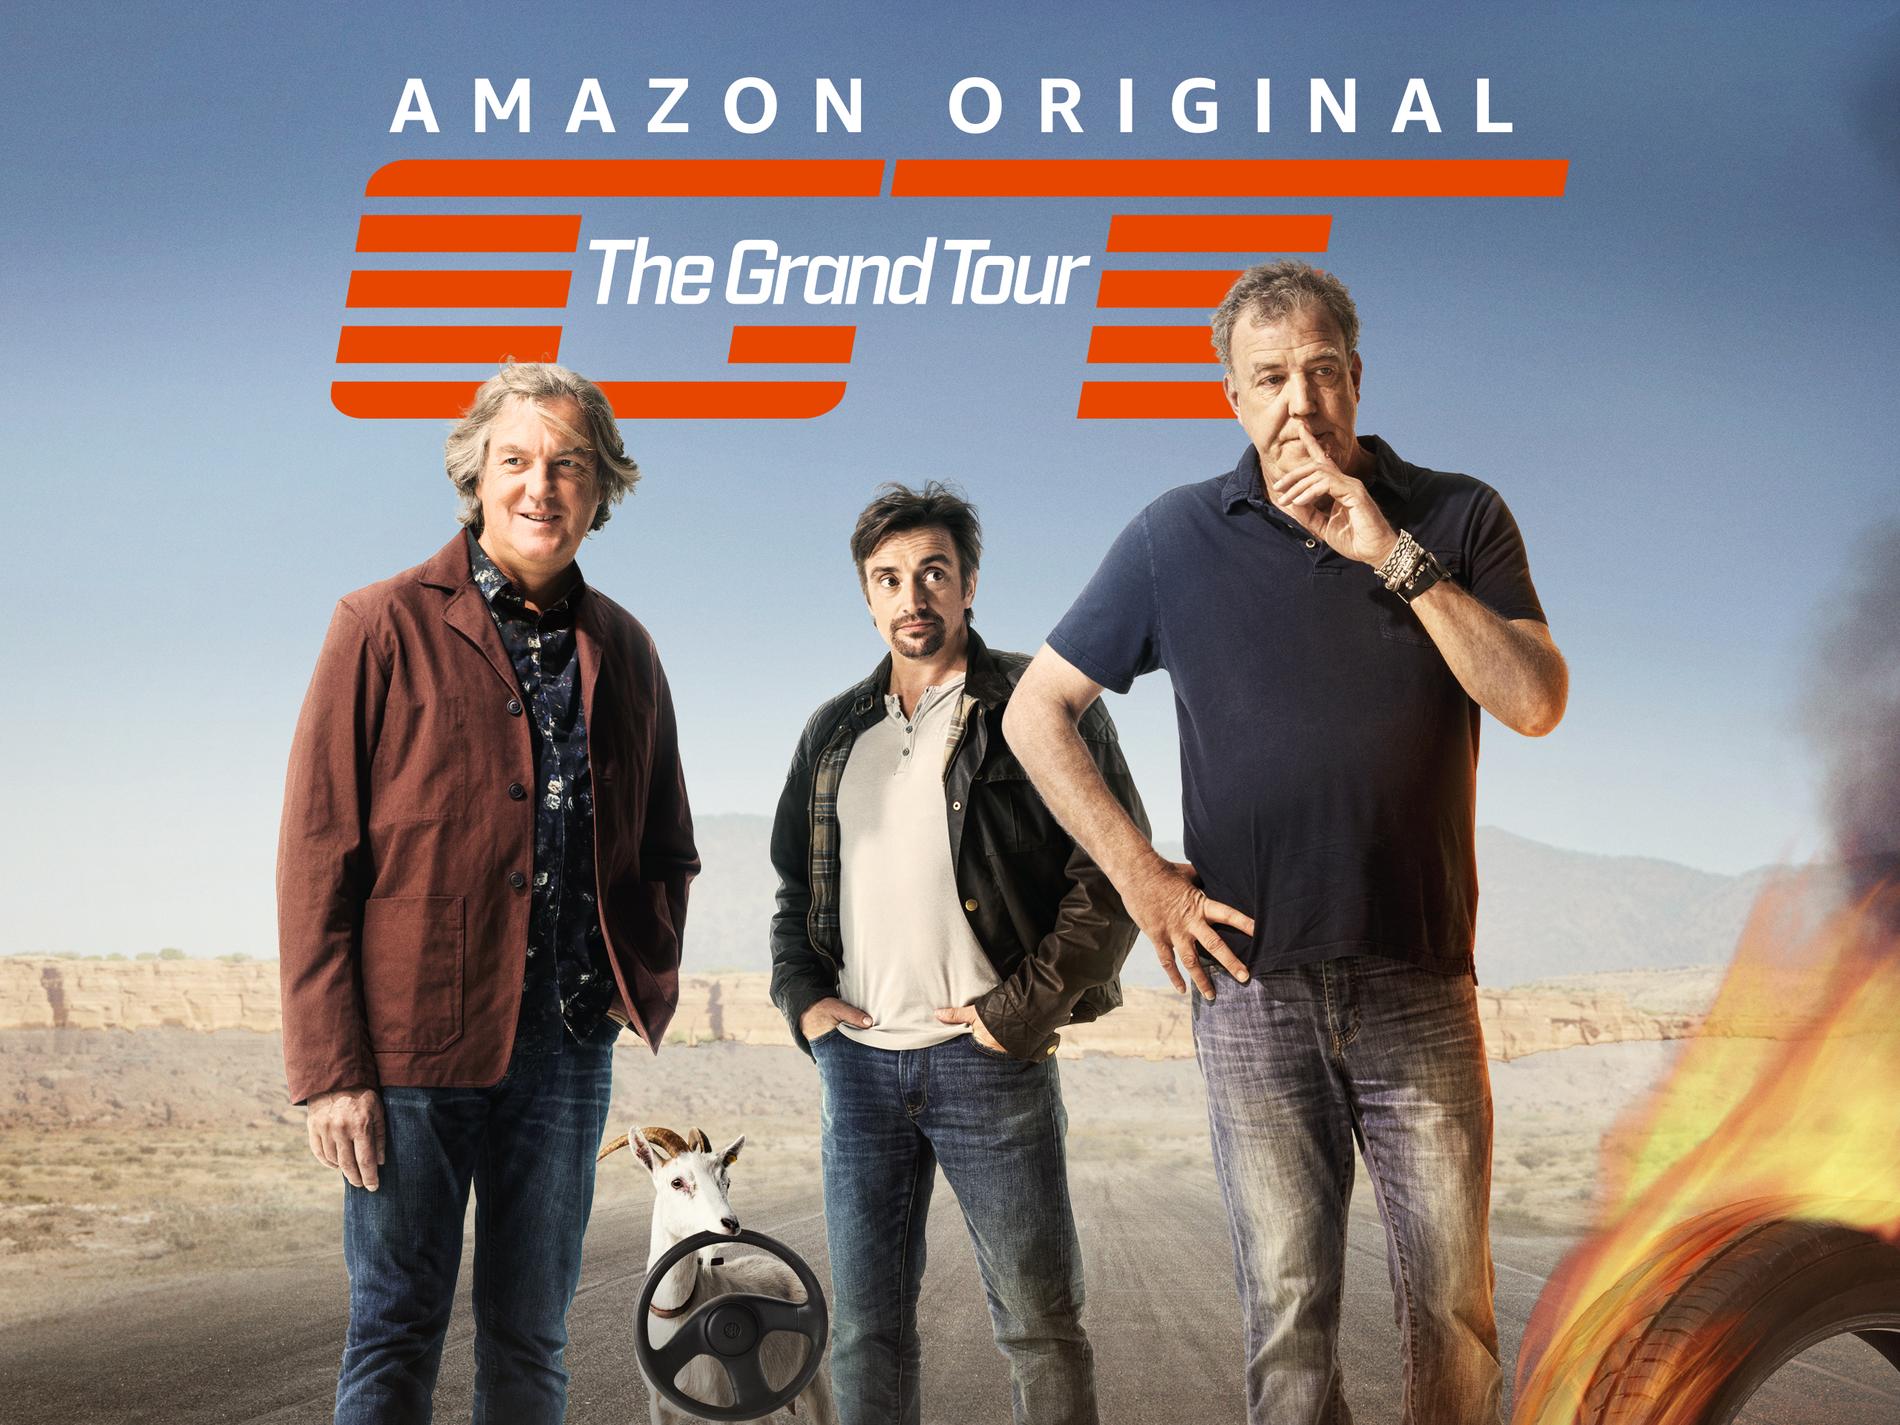 ”The grand tour” med Jeremy Clarkson